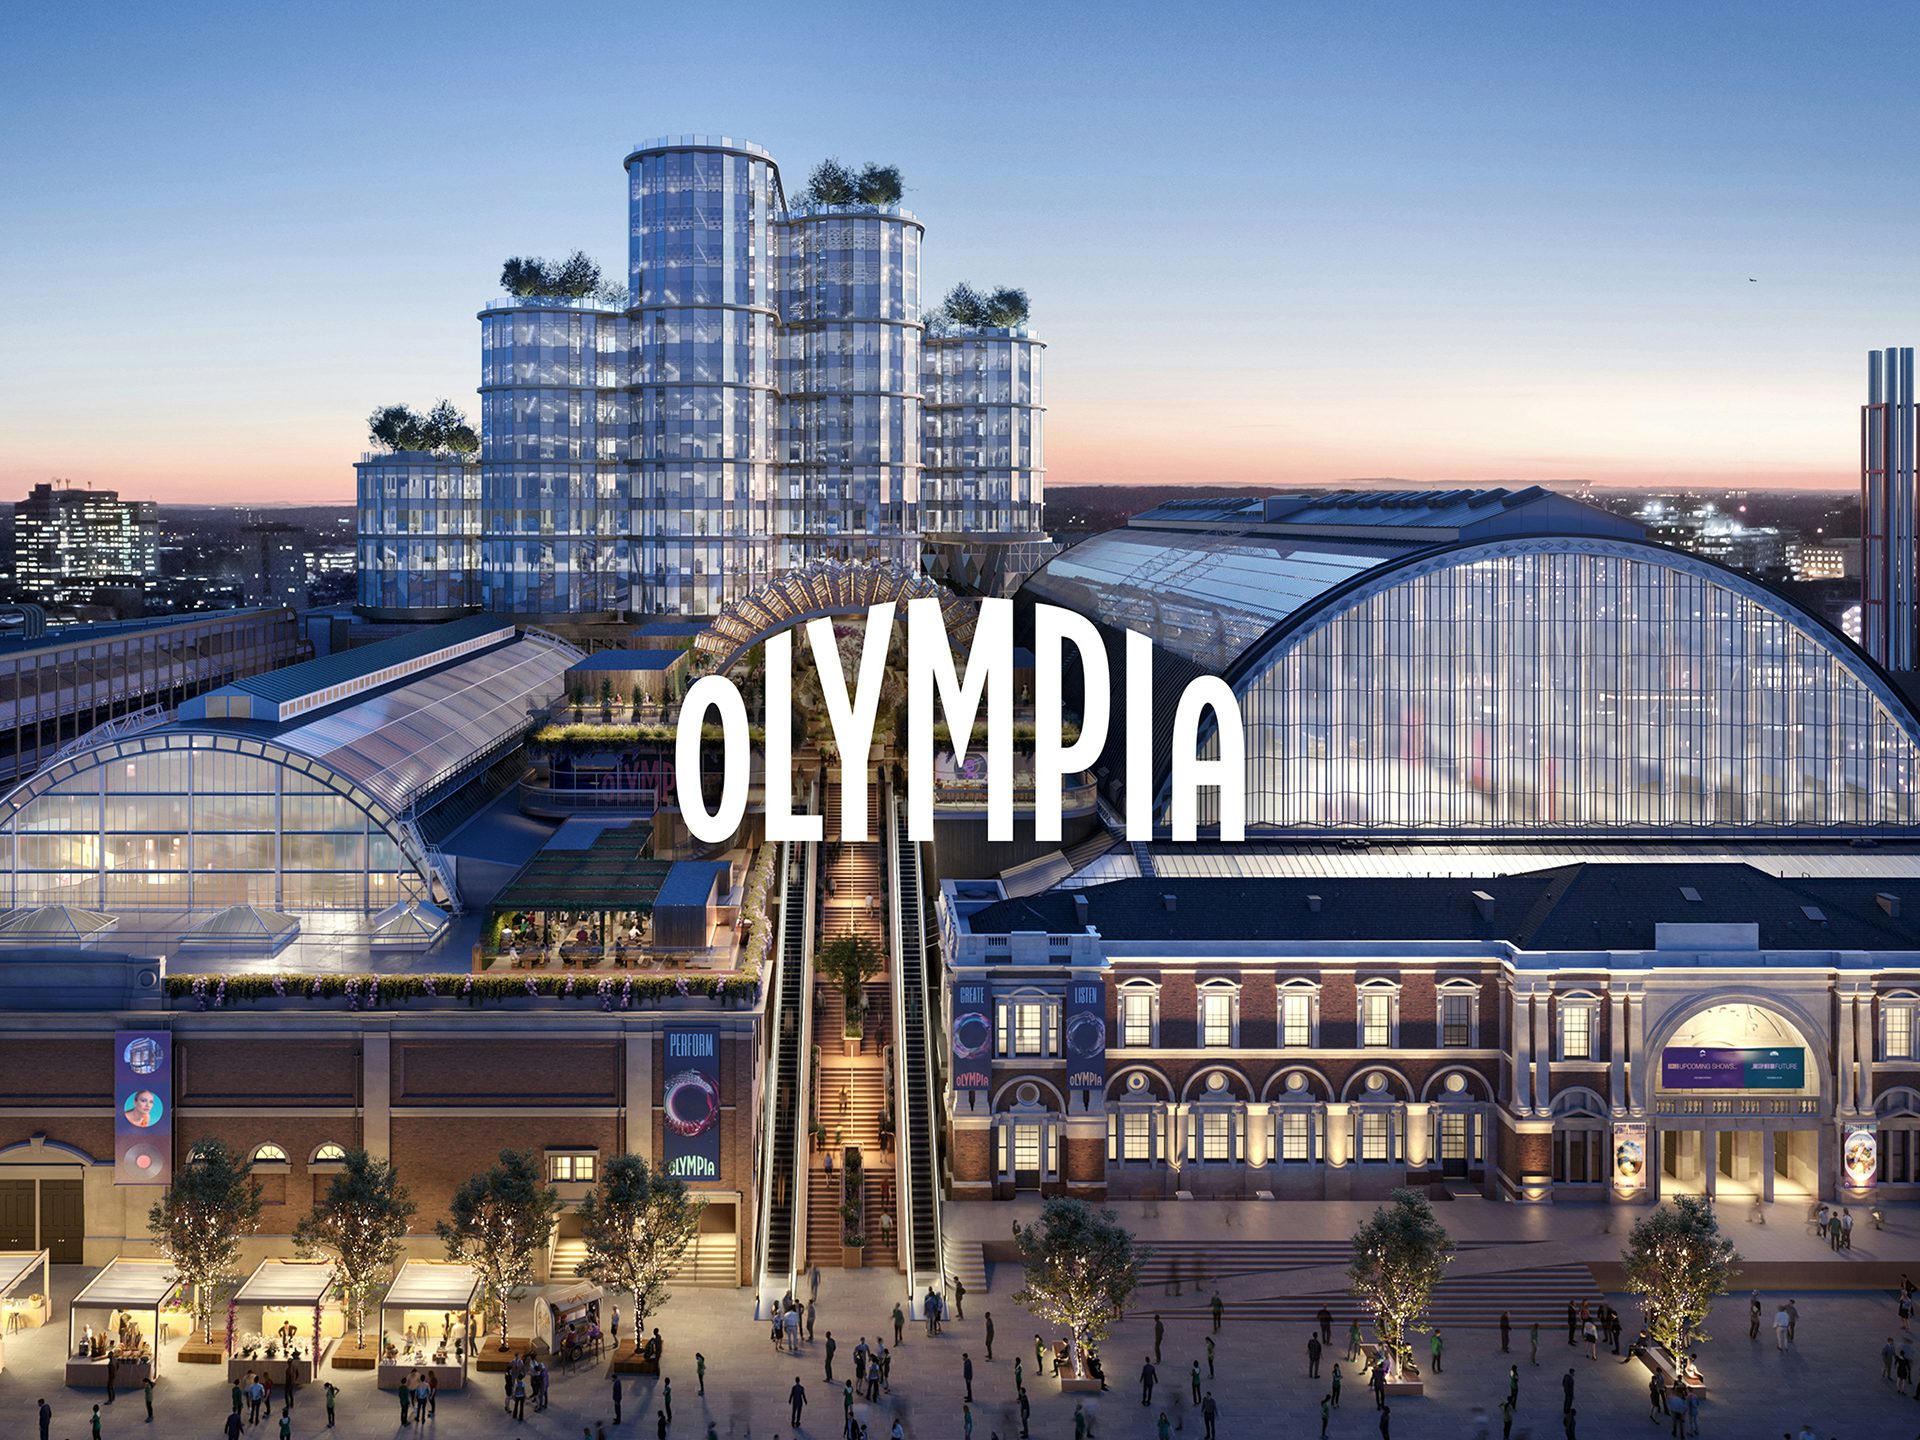 London’s Olympia complex unveils architecturally inspired branding